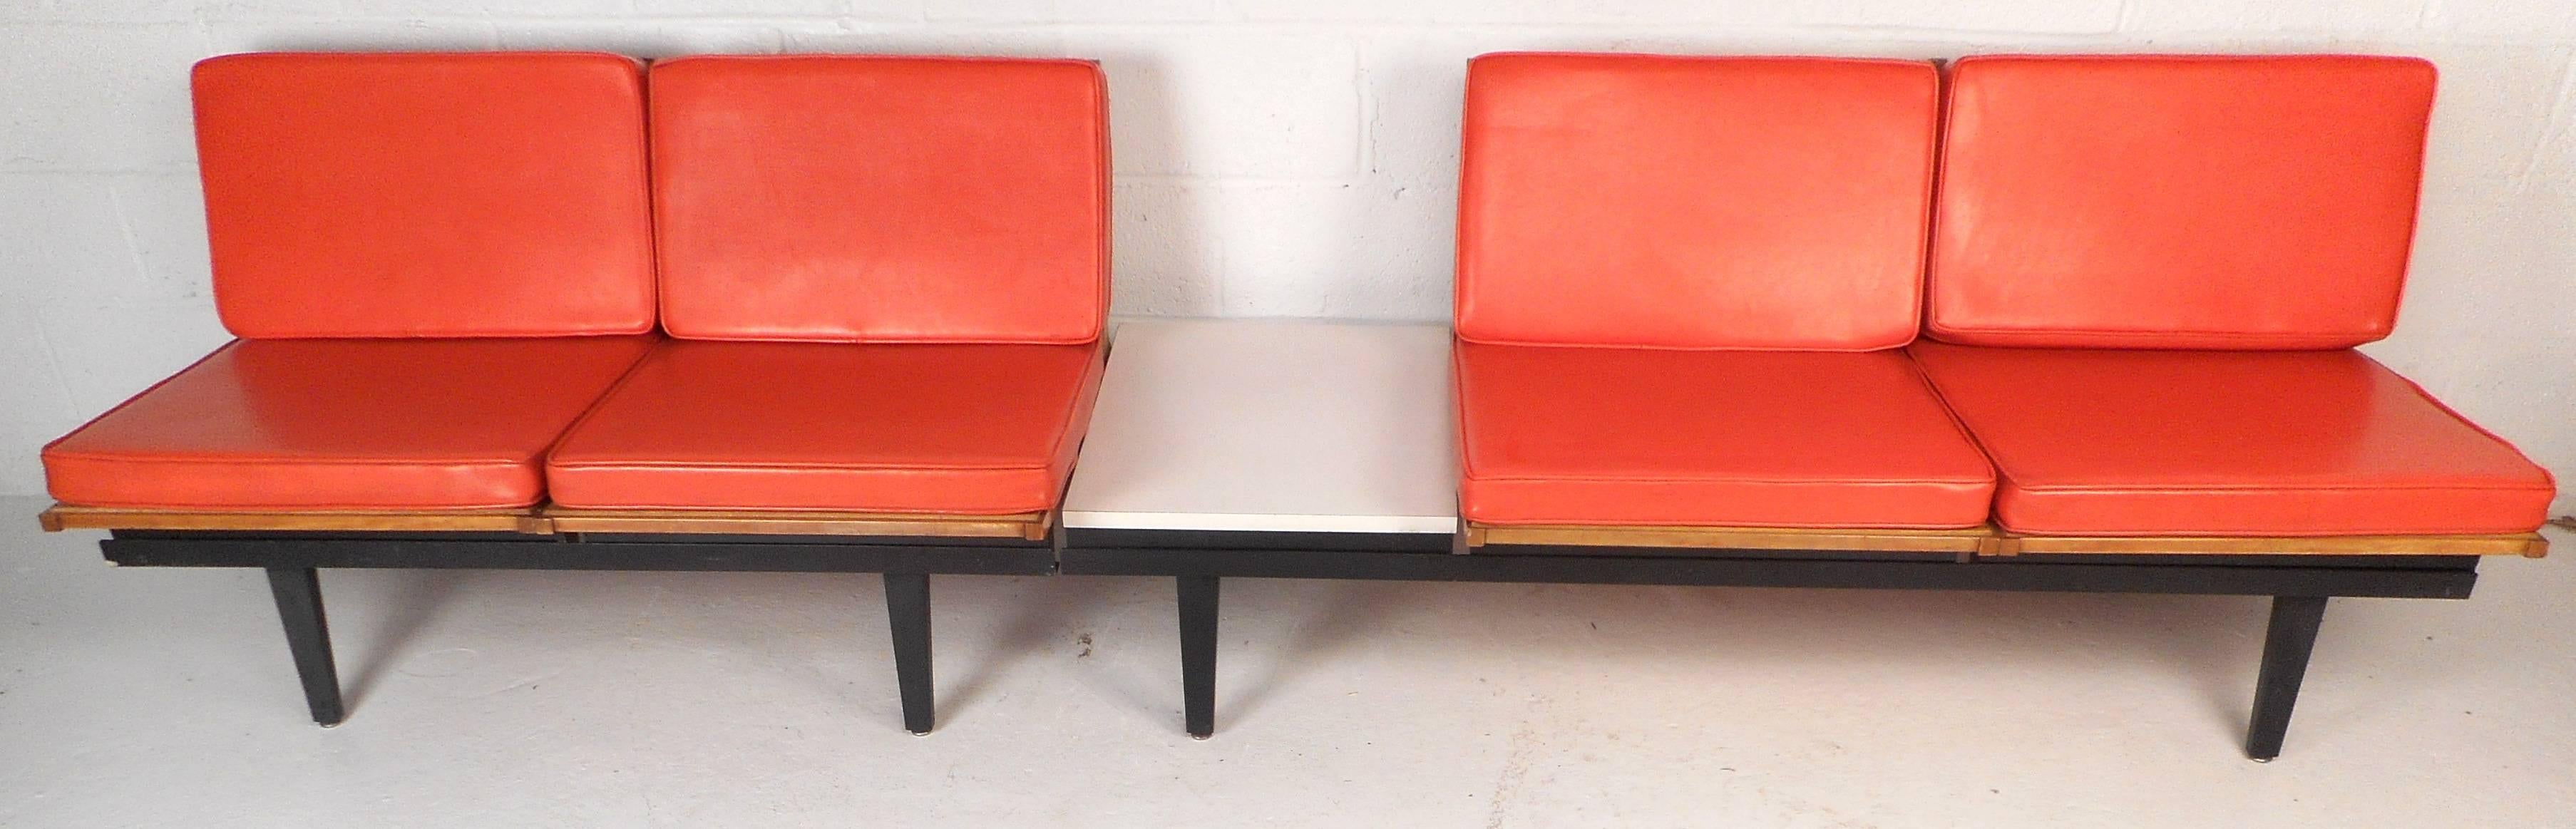 Extremely unique vintage modern lounge chair unit features numerous parts and components and is completely interchangeable. Impressive design by George Nelson for Herman Miller has thick padded orange vinyl cushions, four fold up wood frames, two